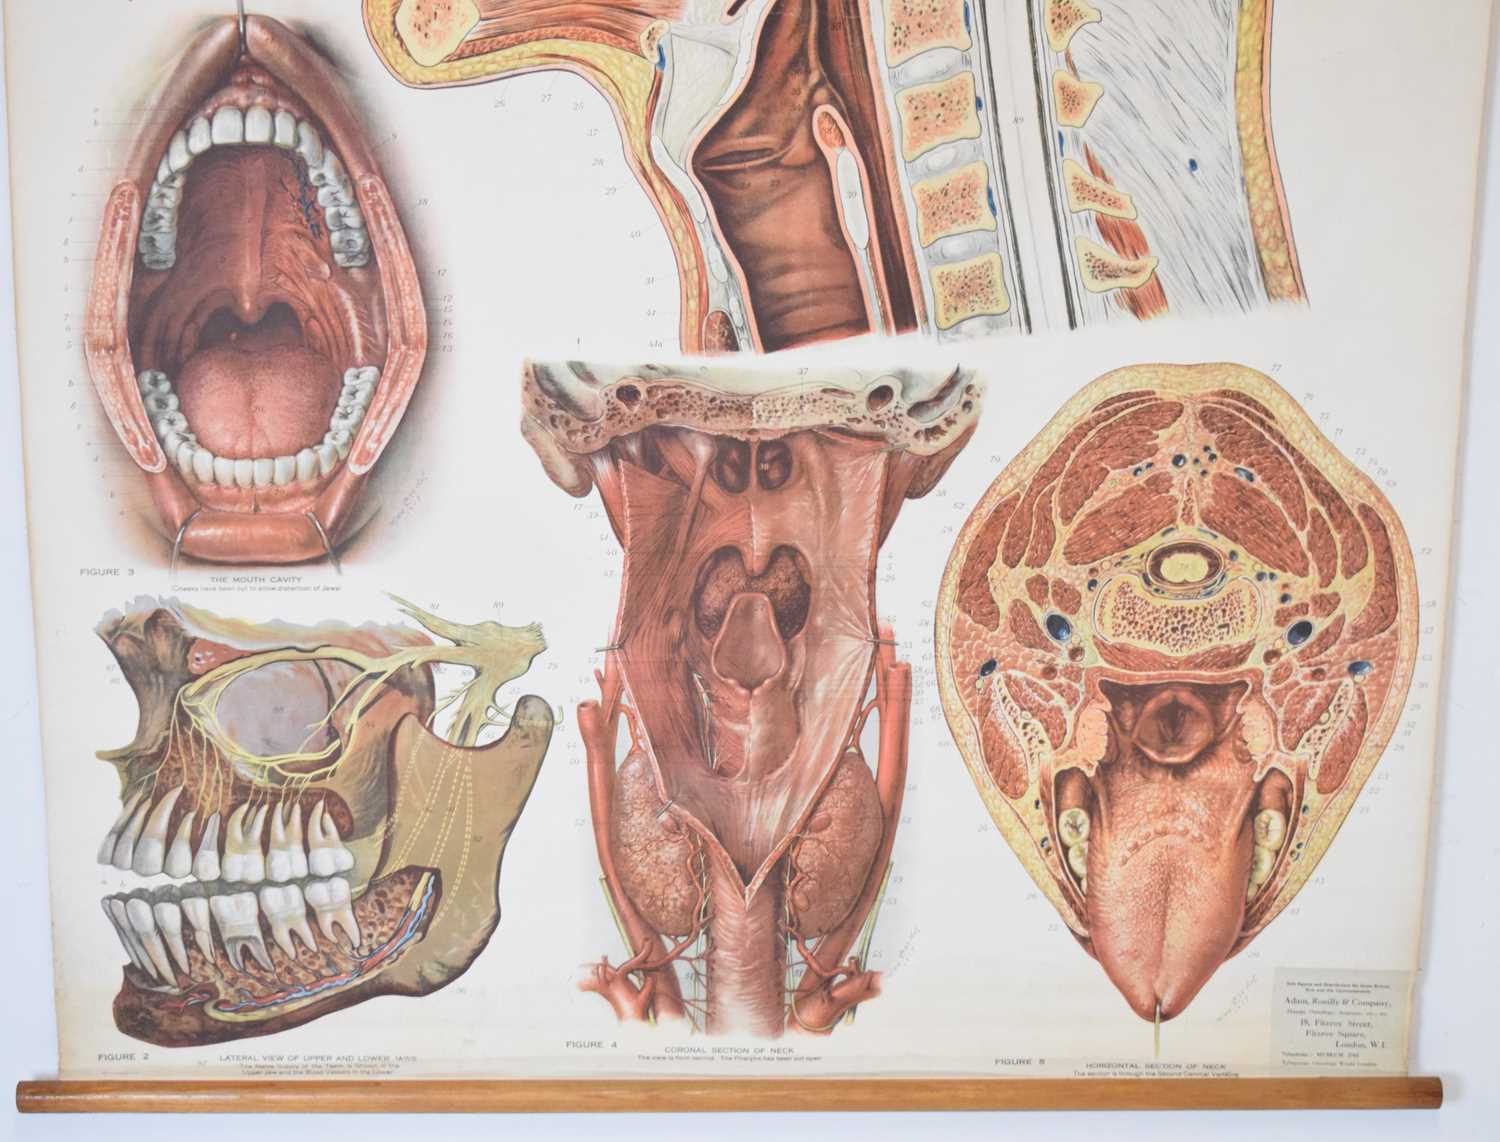 Adam Rouilly & Co Ltd - American Frohse Anatomical Chart - Image 2 of 8